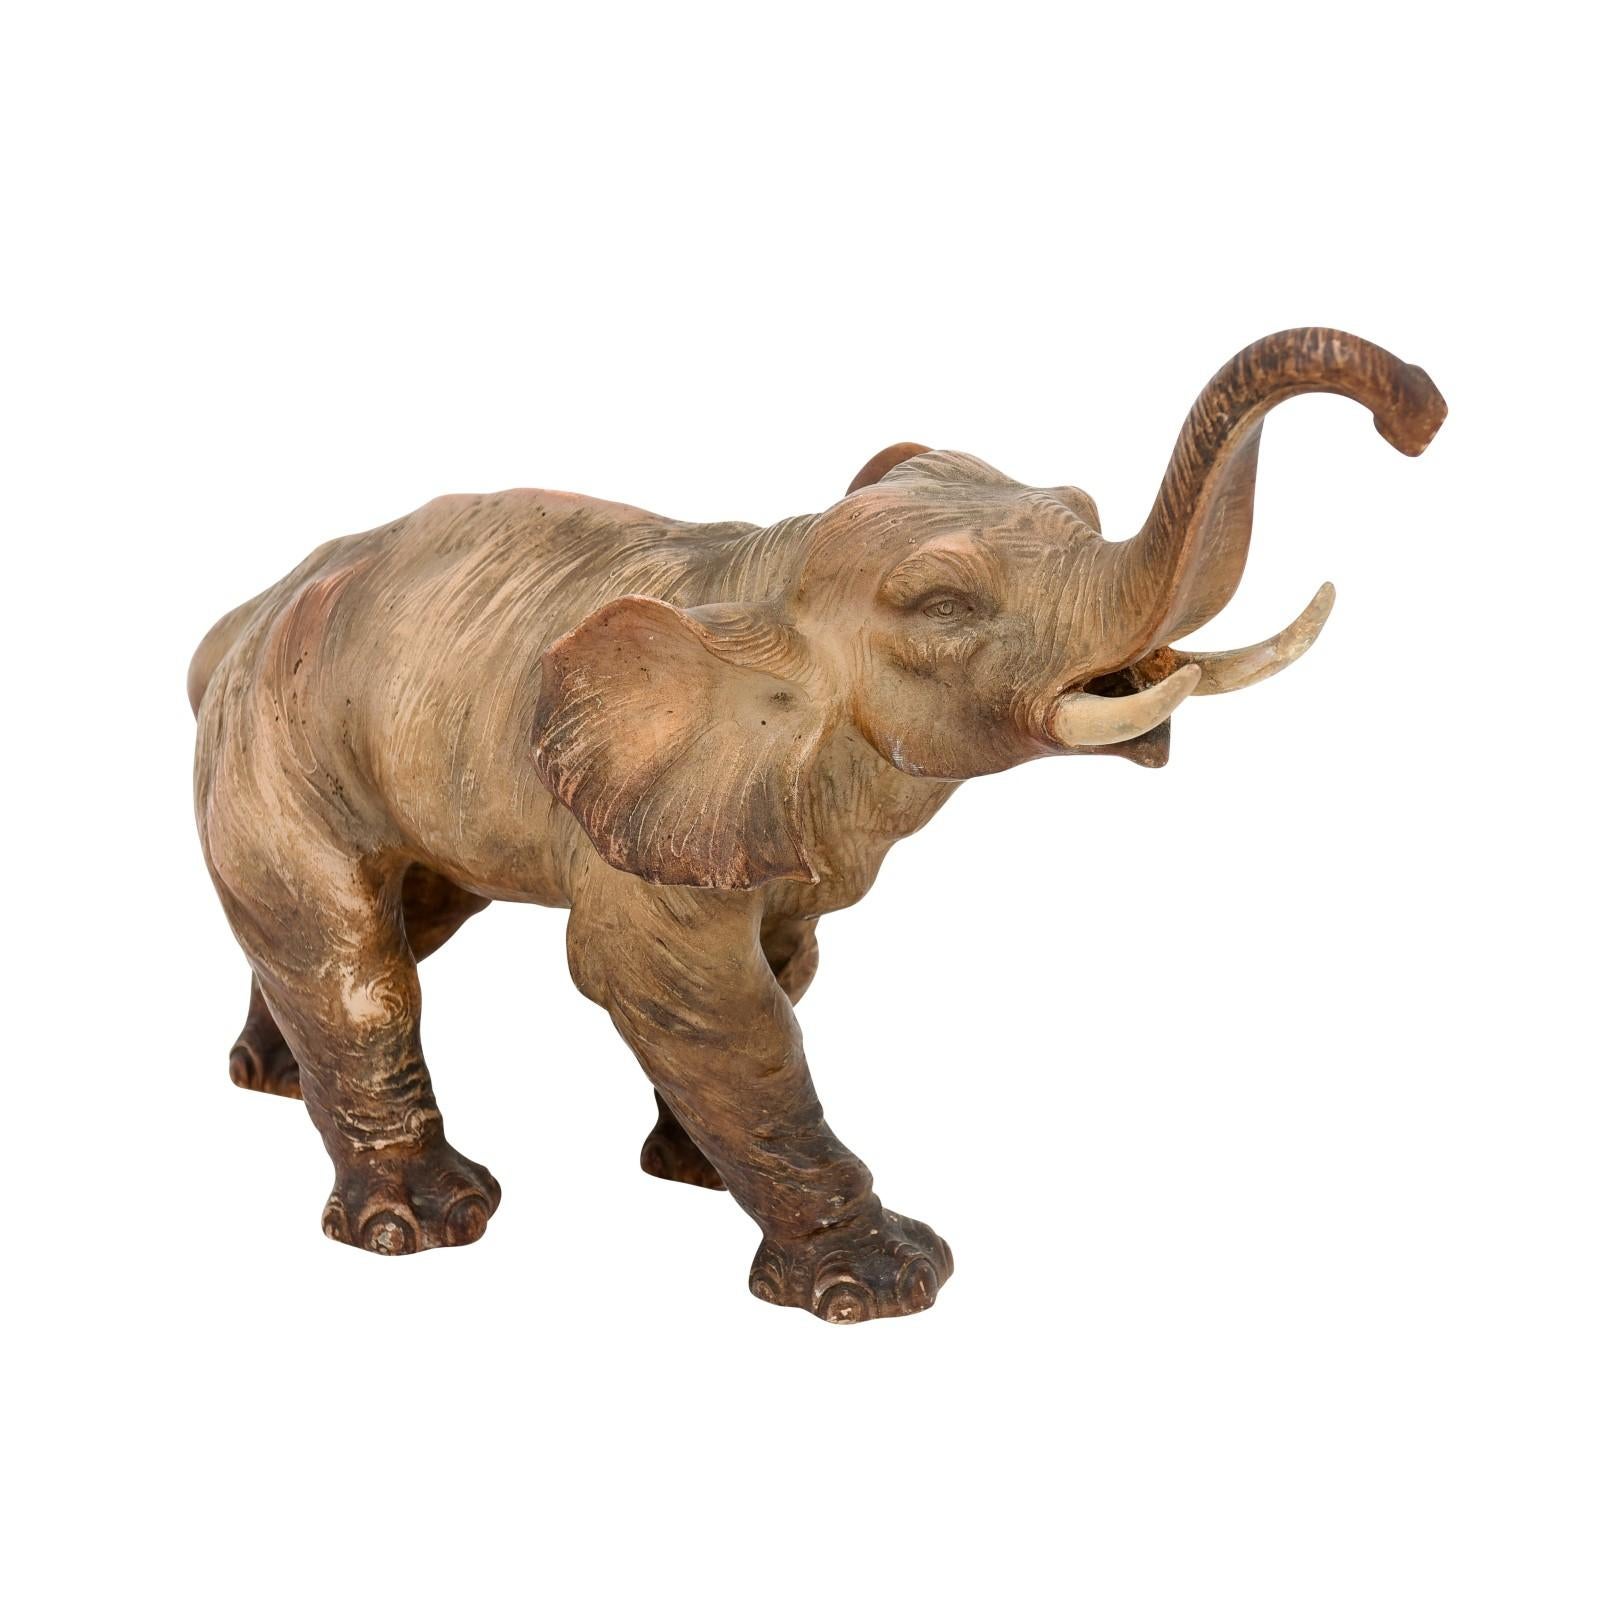 A small French terracotta sculpture from the 19th century depicting a walking elephant with trunk raised, tusks and great expression. Created in France during the 19th century, this small terracotta sculpture captures our attention with its very